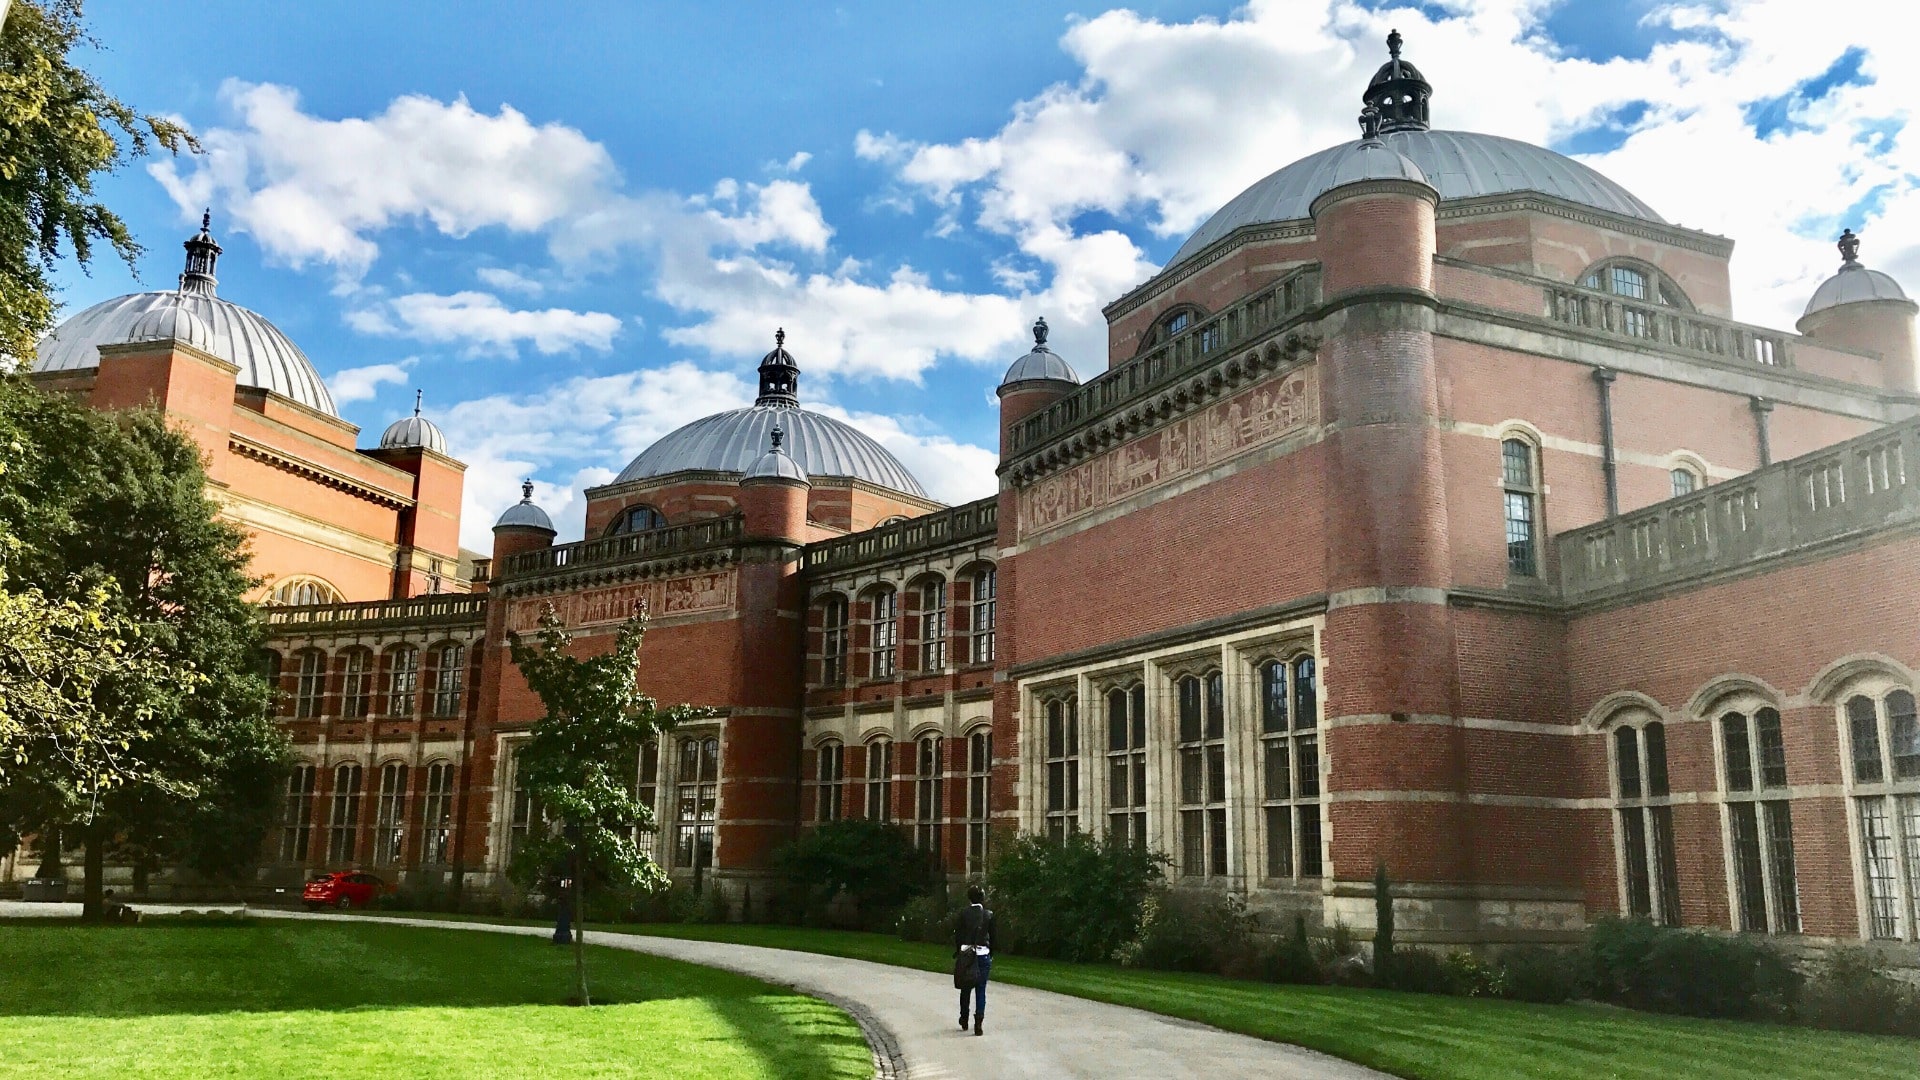 The University of Birmingham's Aston Webb building against a blue sky with white clouds.